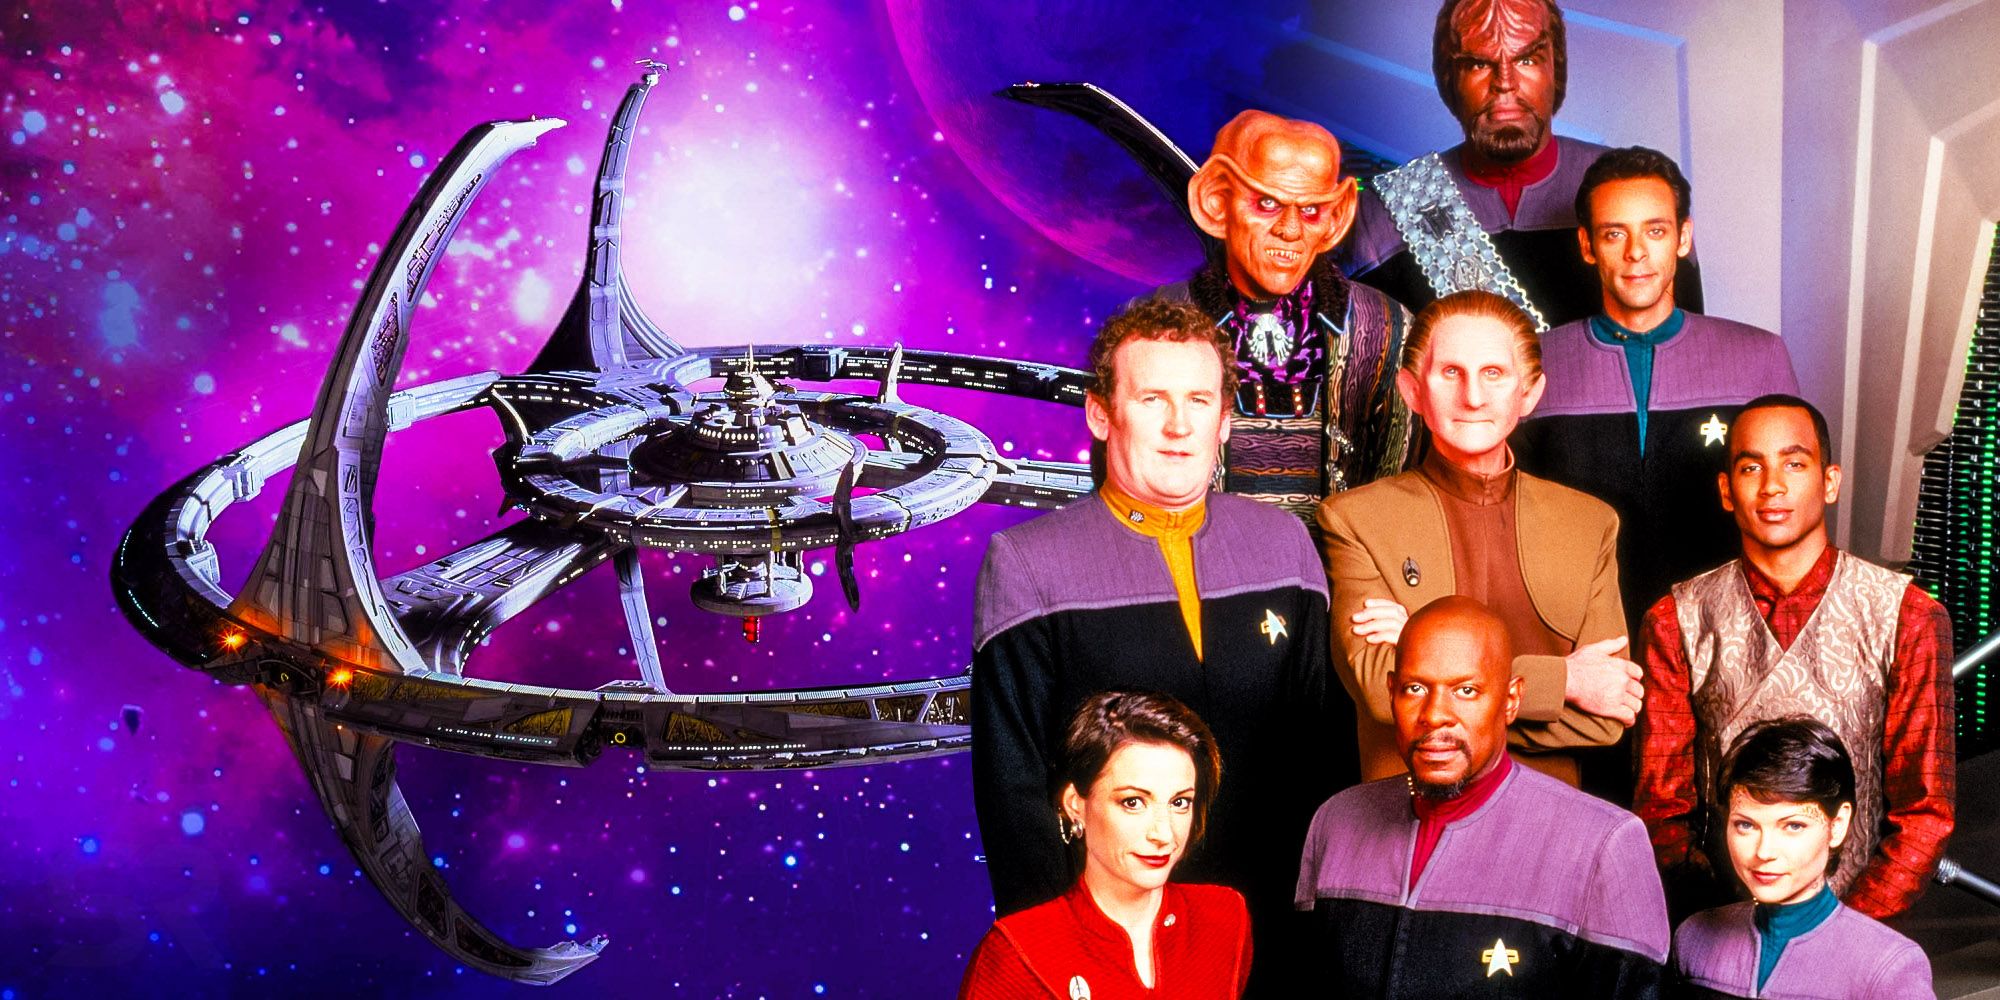 Deep space nine station and cast